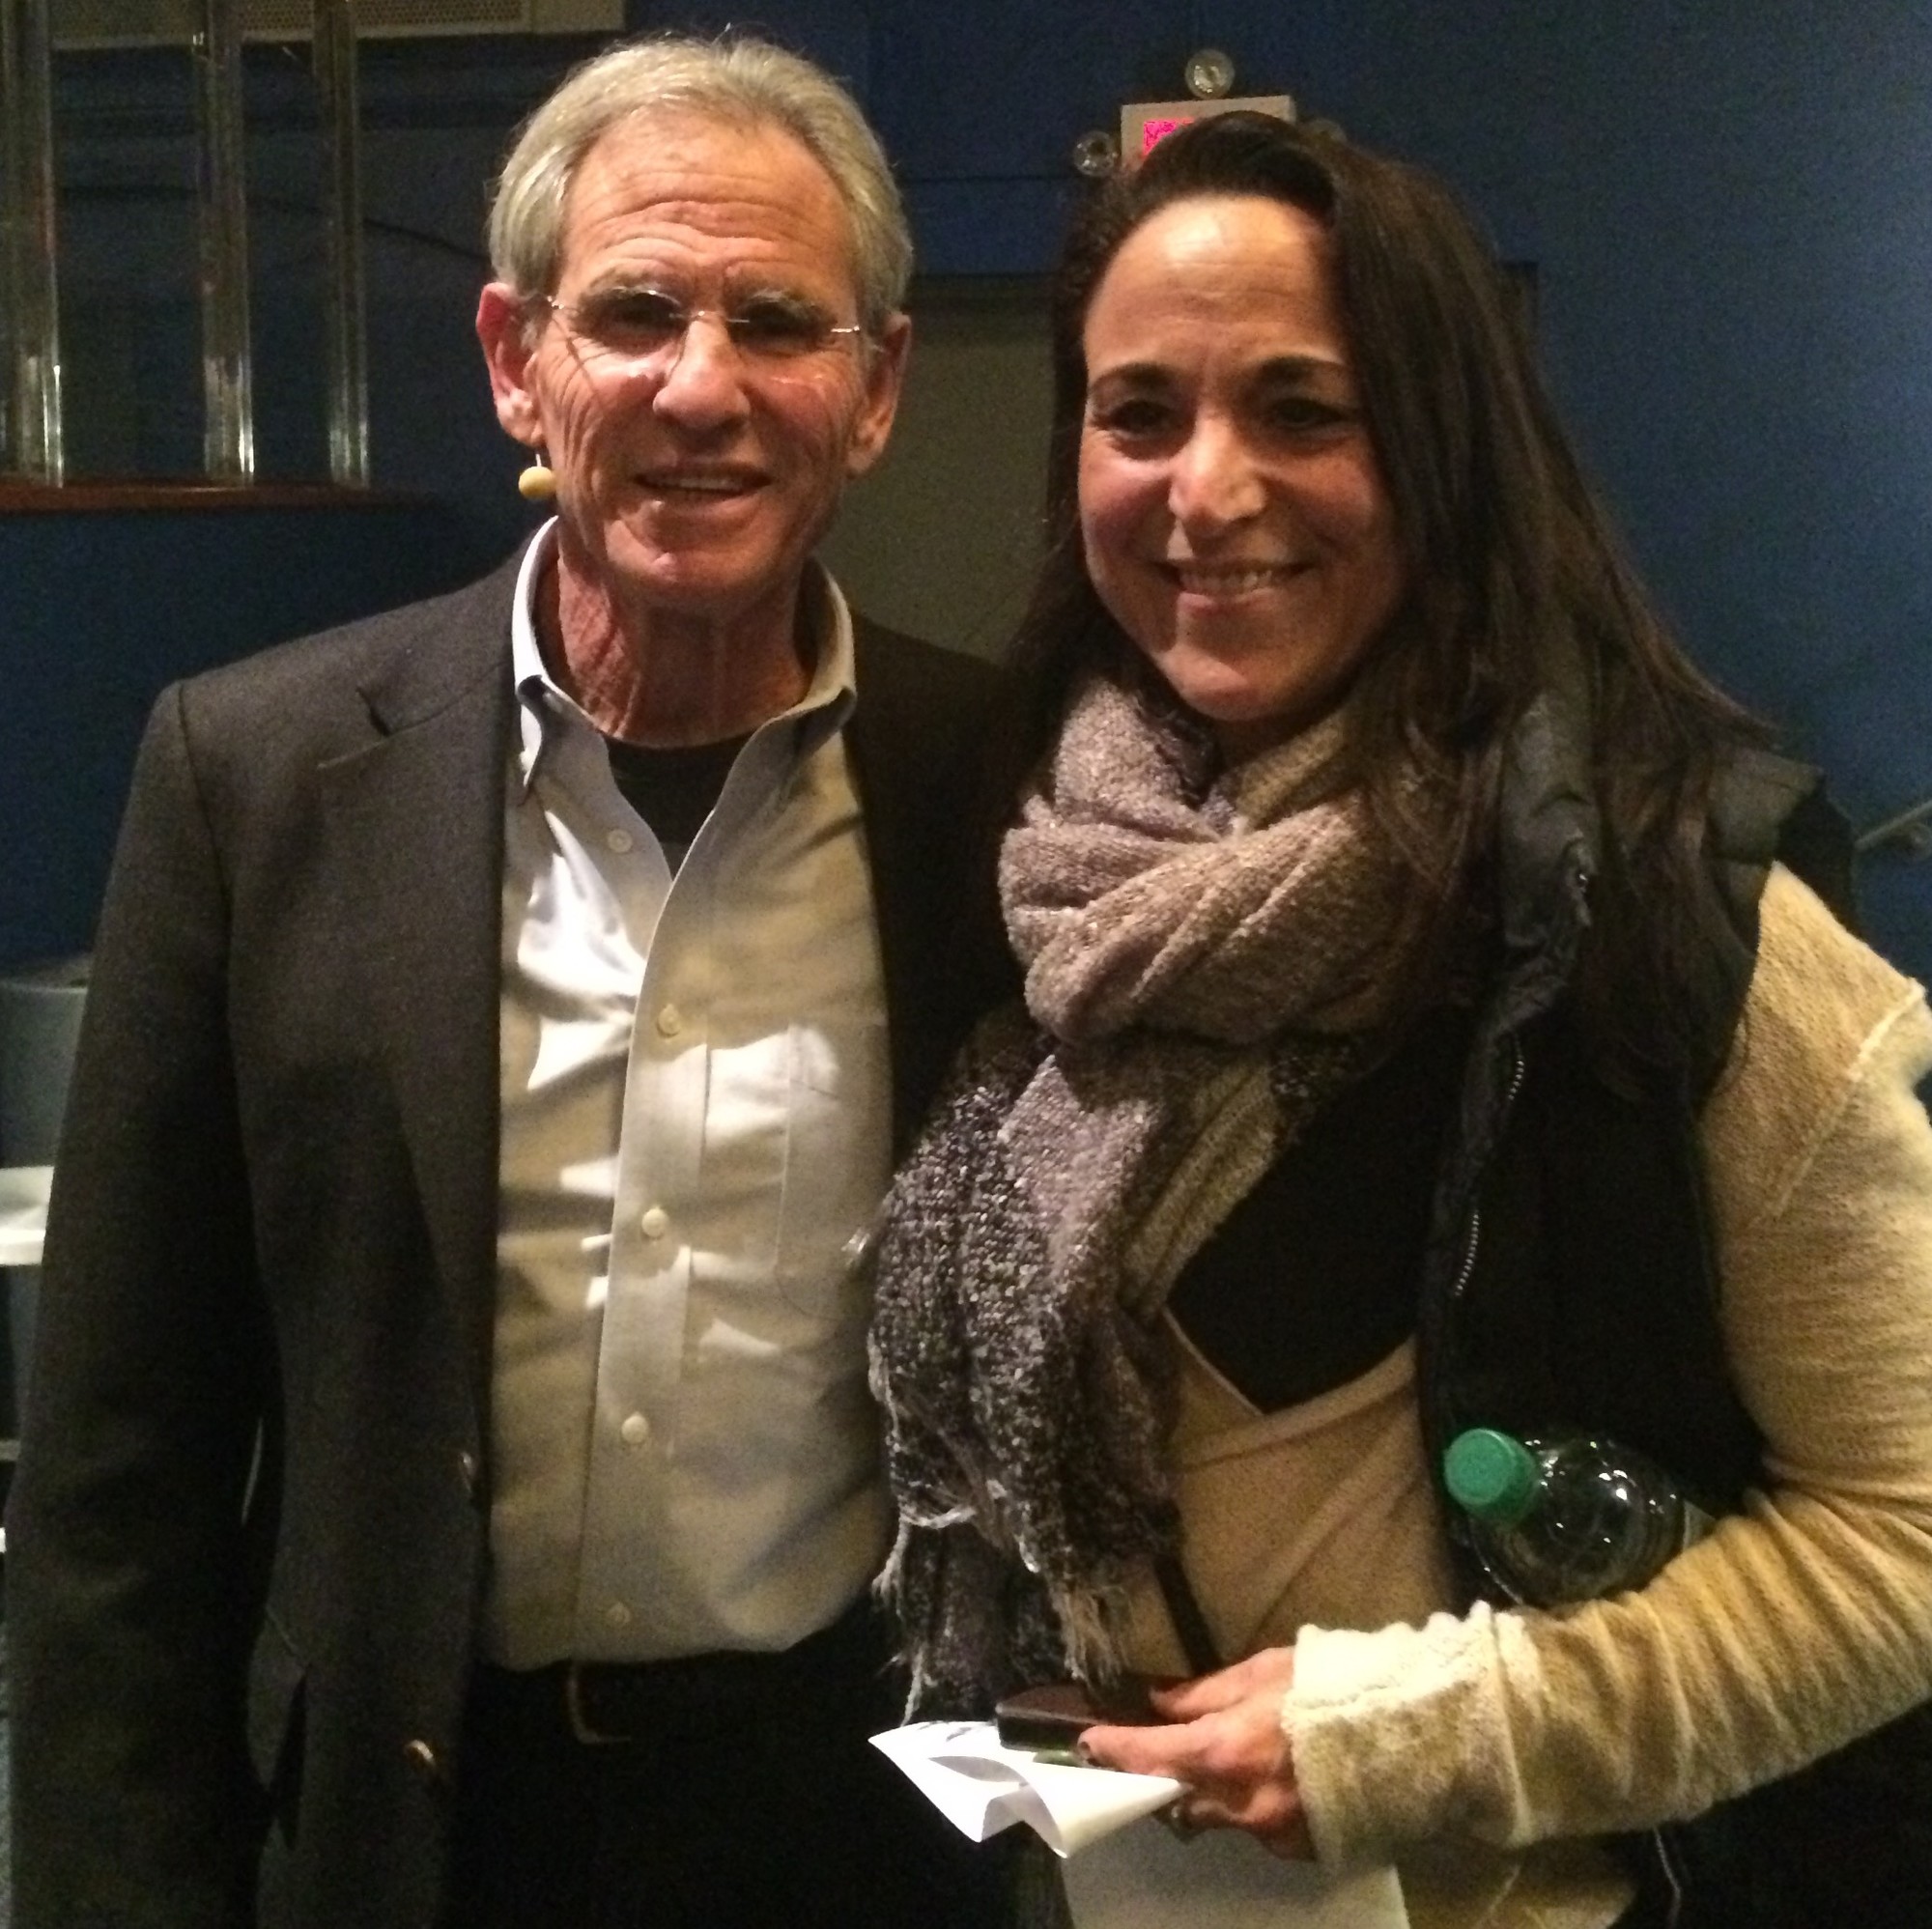 Jon Kabat-Zinn, left, with DeBetta in November 2015, developed the Mindfulness-Based Stress Reduction program at the University of Massachusetts Medical Center in 1979, which used specific exercises to help patients dealing with chronic pain.